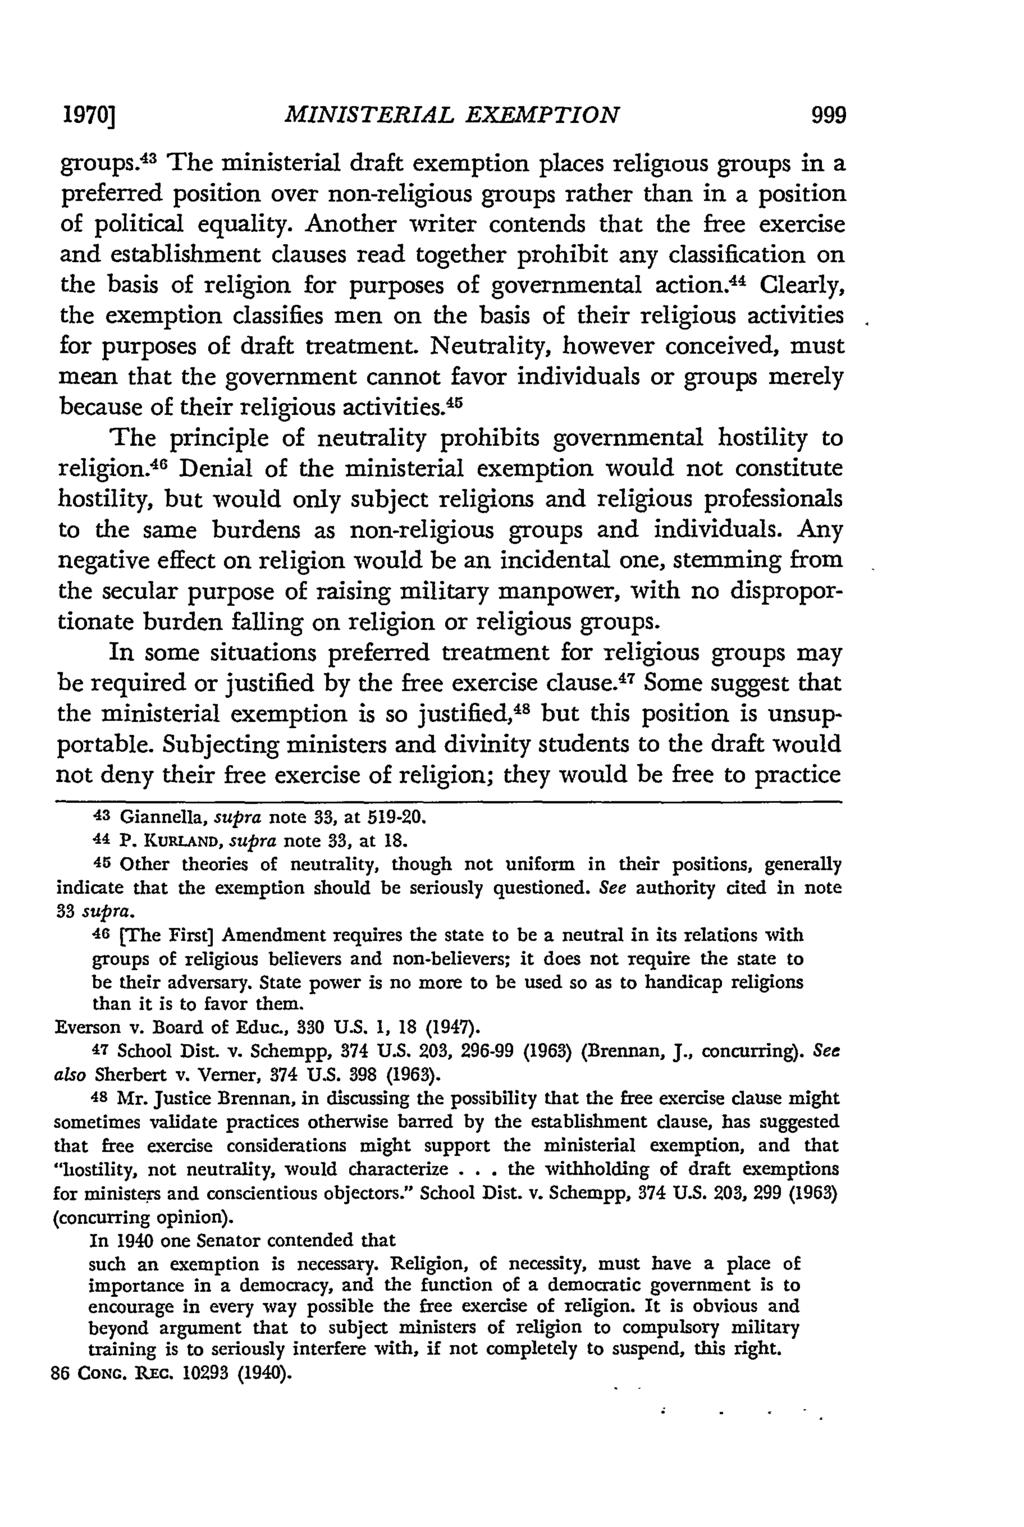 1970] MINISTERIAL EXEMPTION groups. 43 The ministerial draft exemption places religious groups in a preferred position over non-religious groups rather than in a position of political equality.